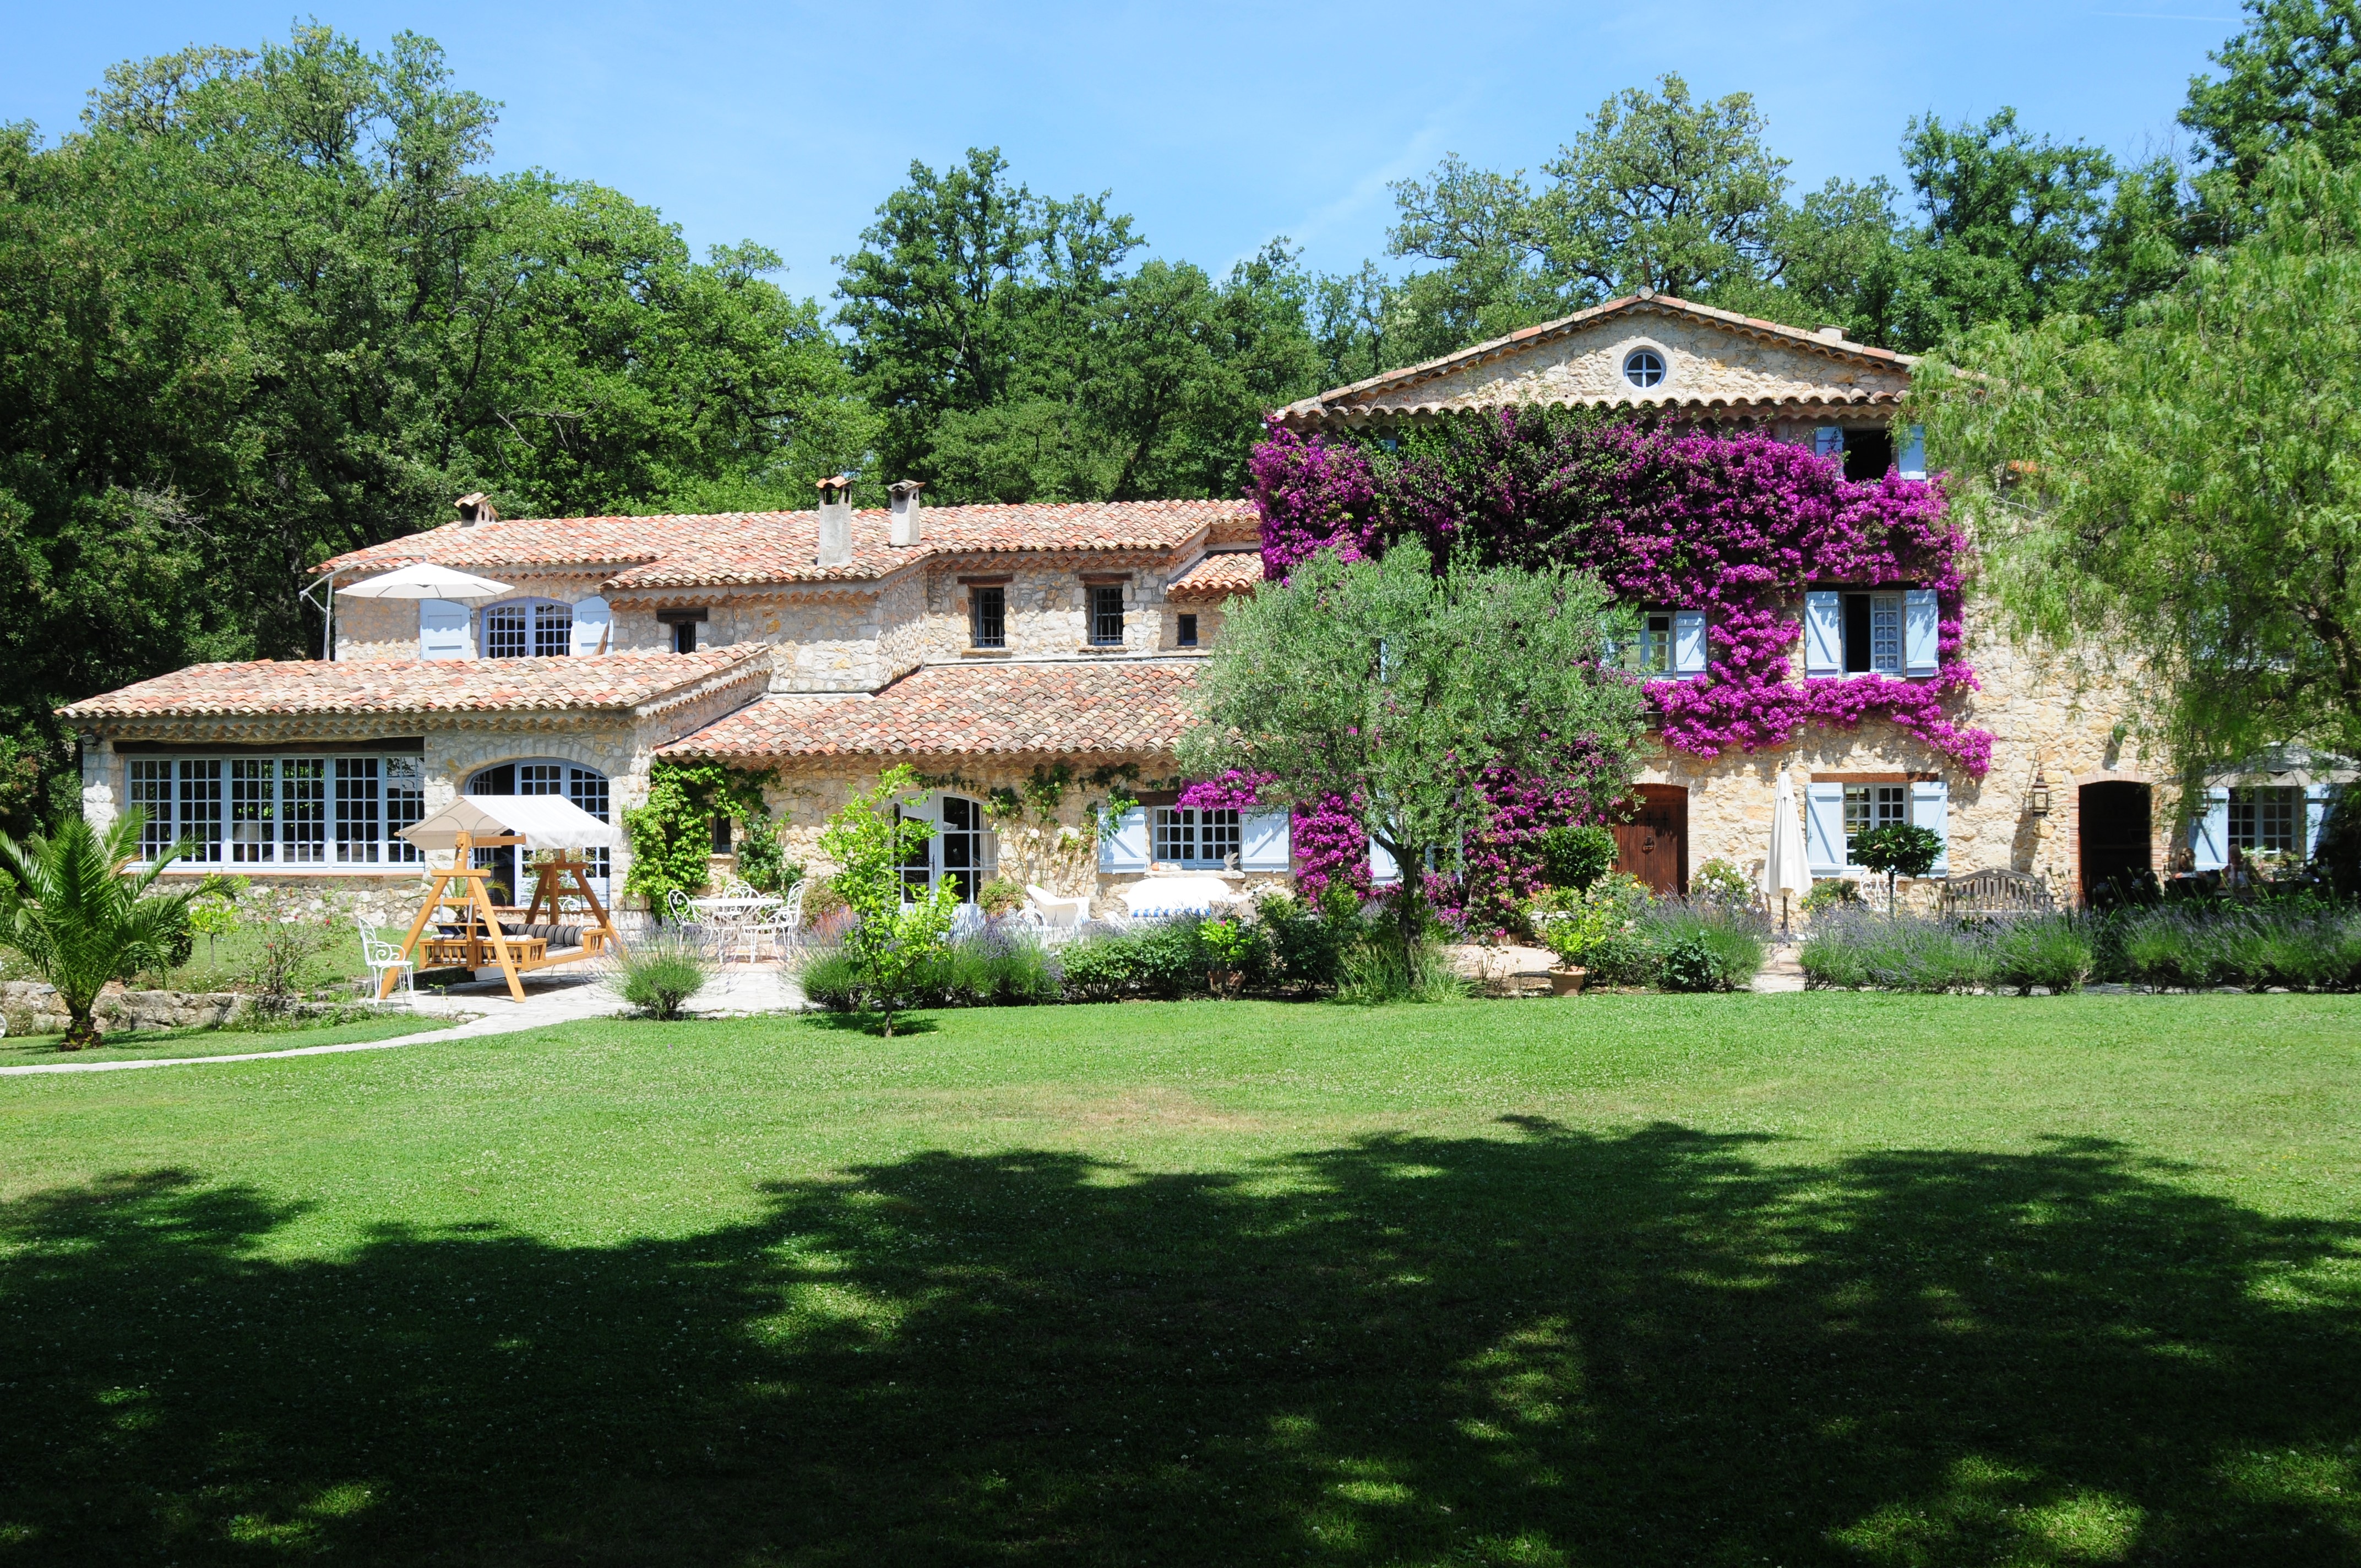 Sell your Villa in the South of France with our Unique Approach 